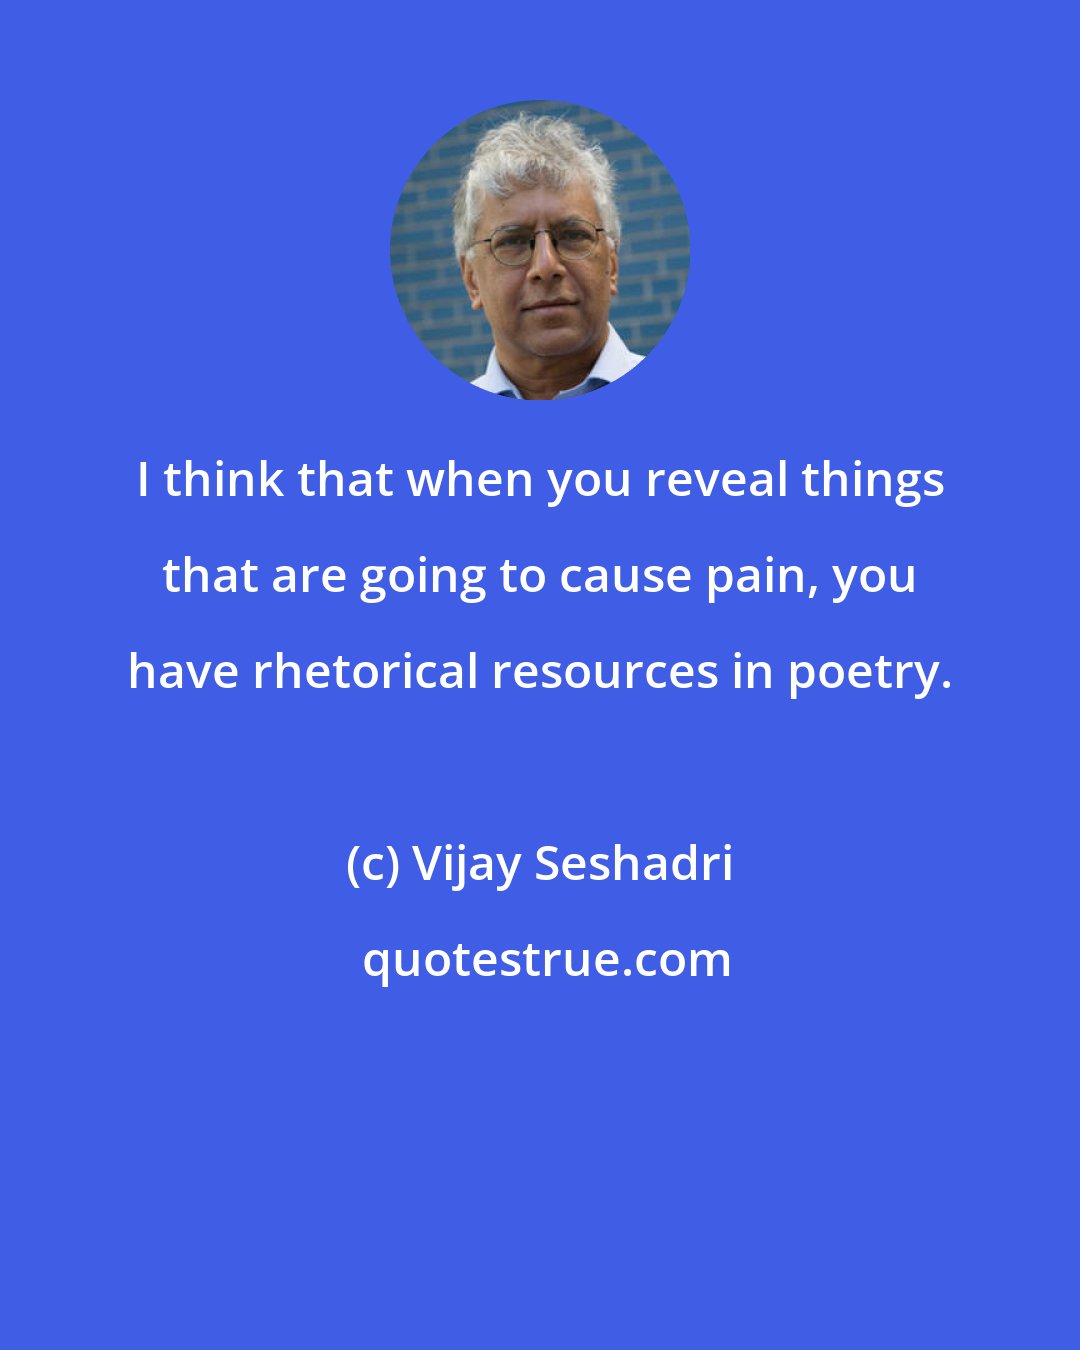 Vijay Seshadri: I think that when you reveal things that are going to cause pain, you have rhetorical resources in poetry.